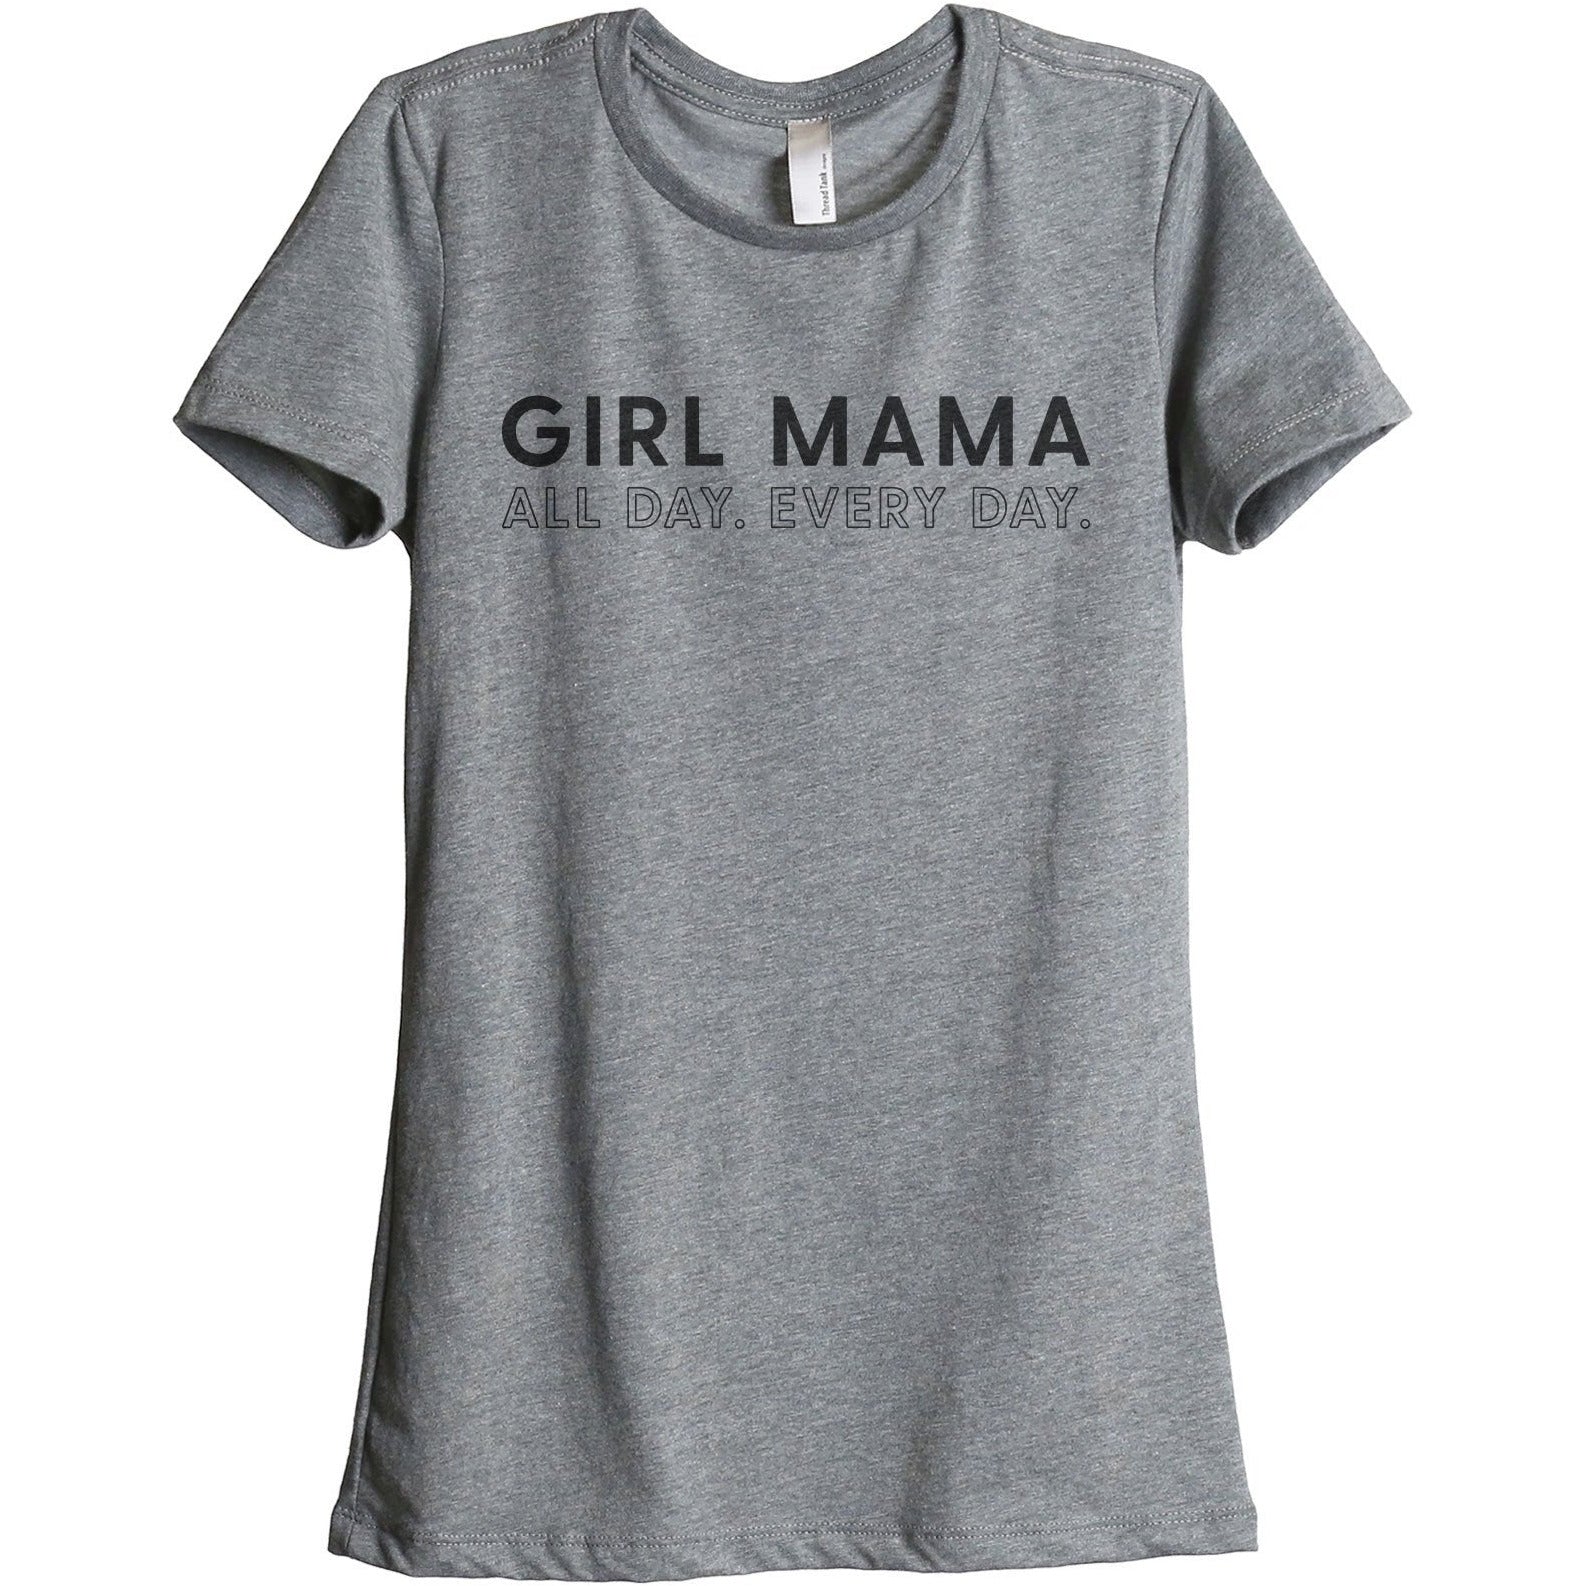 Girl Mama All Day Every Day Women's Relaxed Crewneck T-Shirt Top Tee Heather Grey